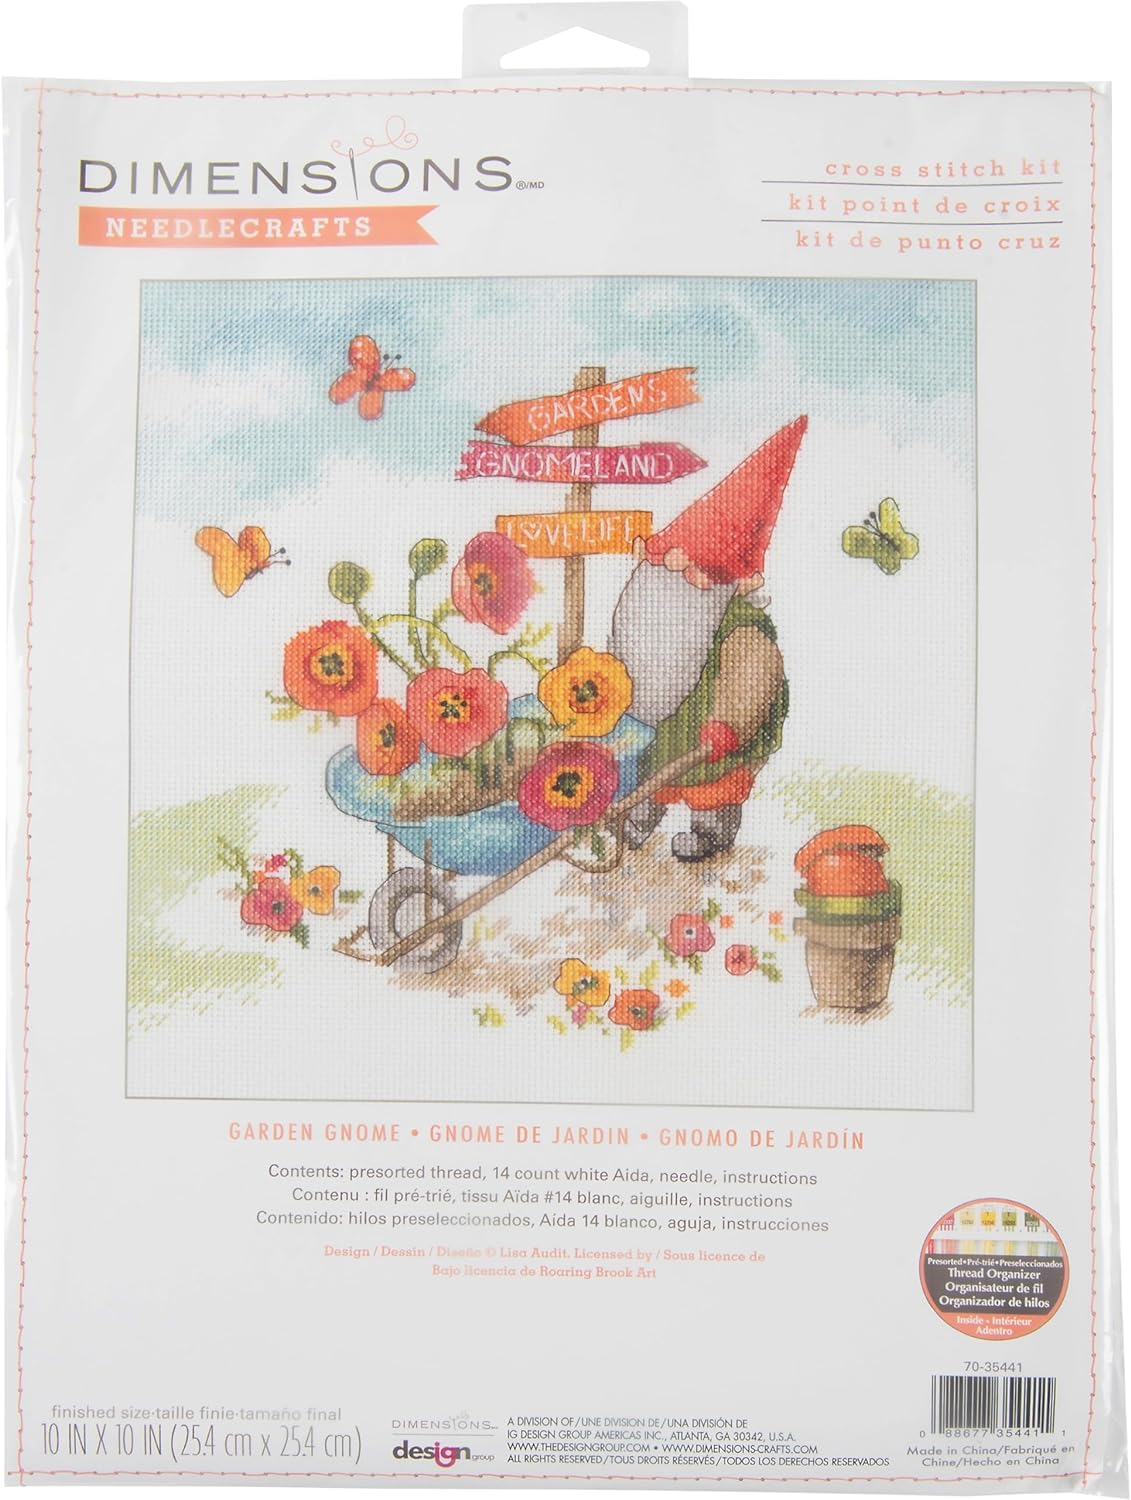 Cross Stitch Kit "Garden Gnome" 70-35441 by Dimensions